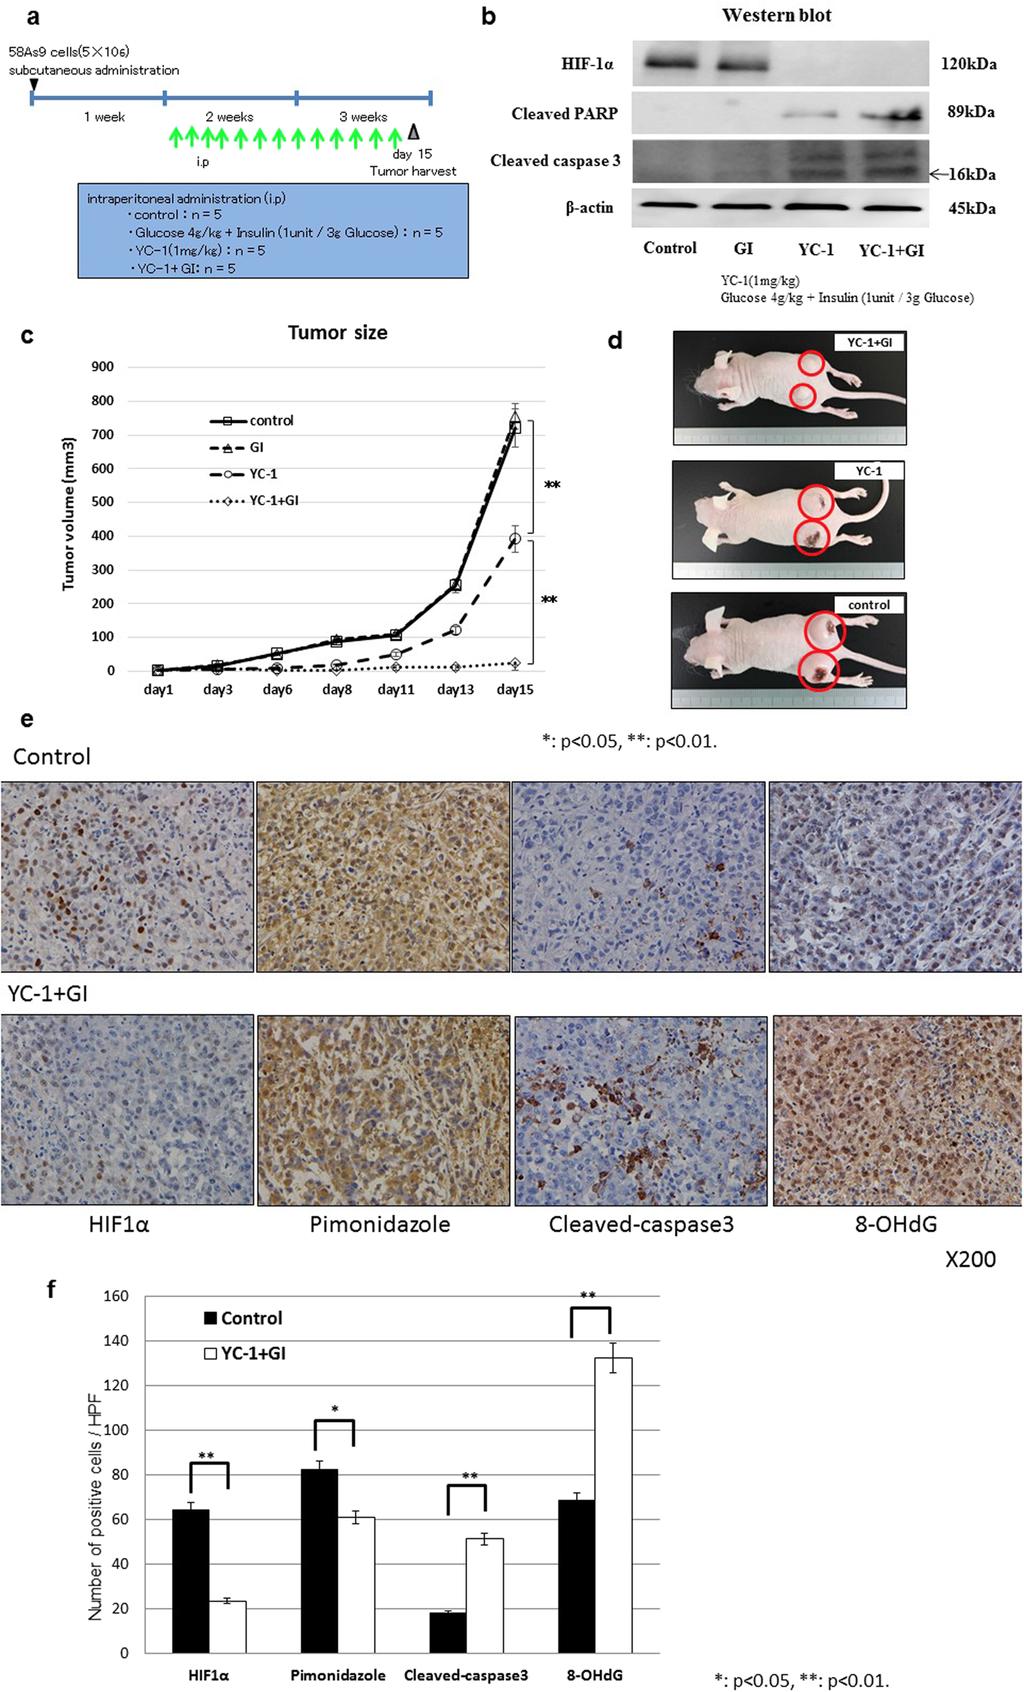 www.nature.com/scientificreports/ Figure 7. In vivo effect of YC-1 + GI treatment on tumour xenografts. (a) Experimental schedule of the YC-1 + GI treatment.